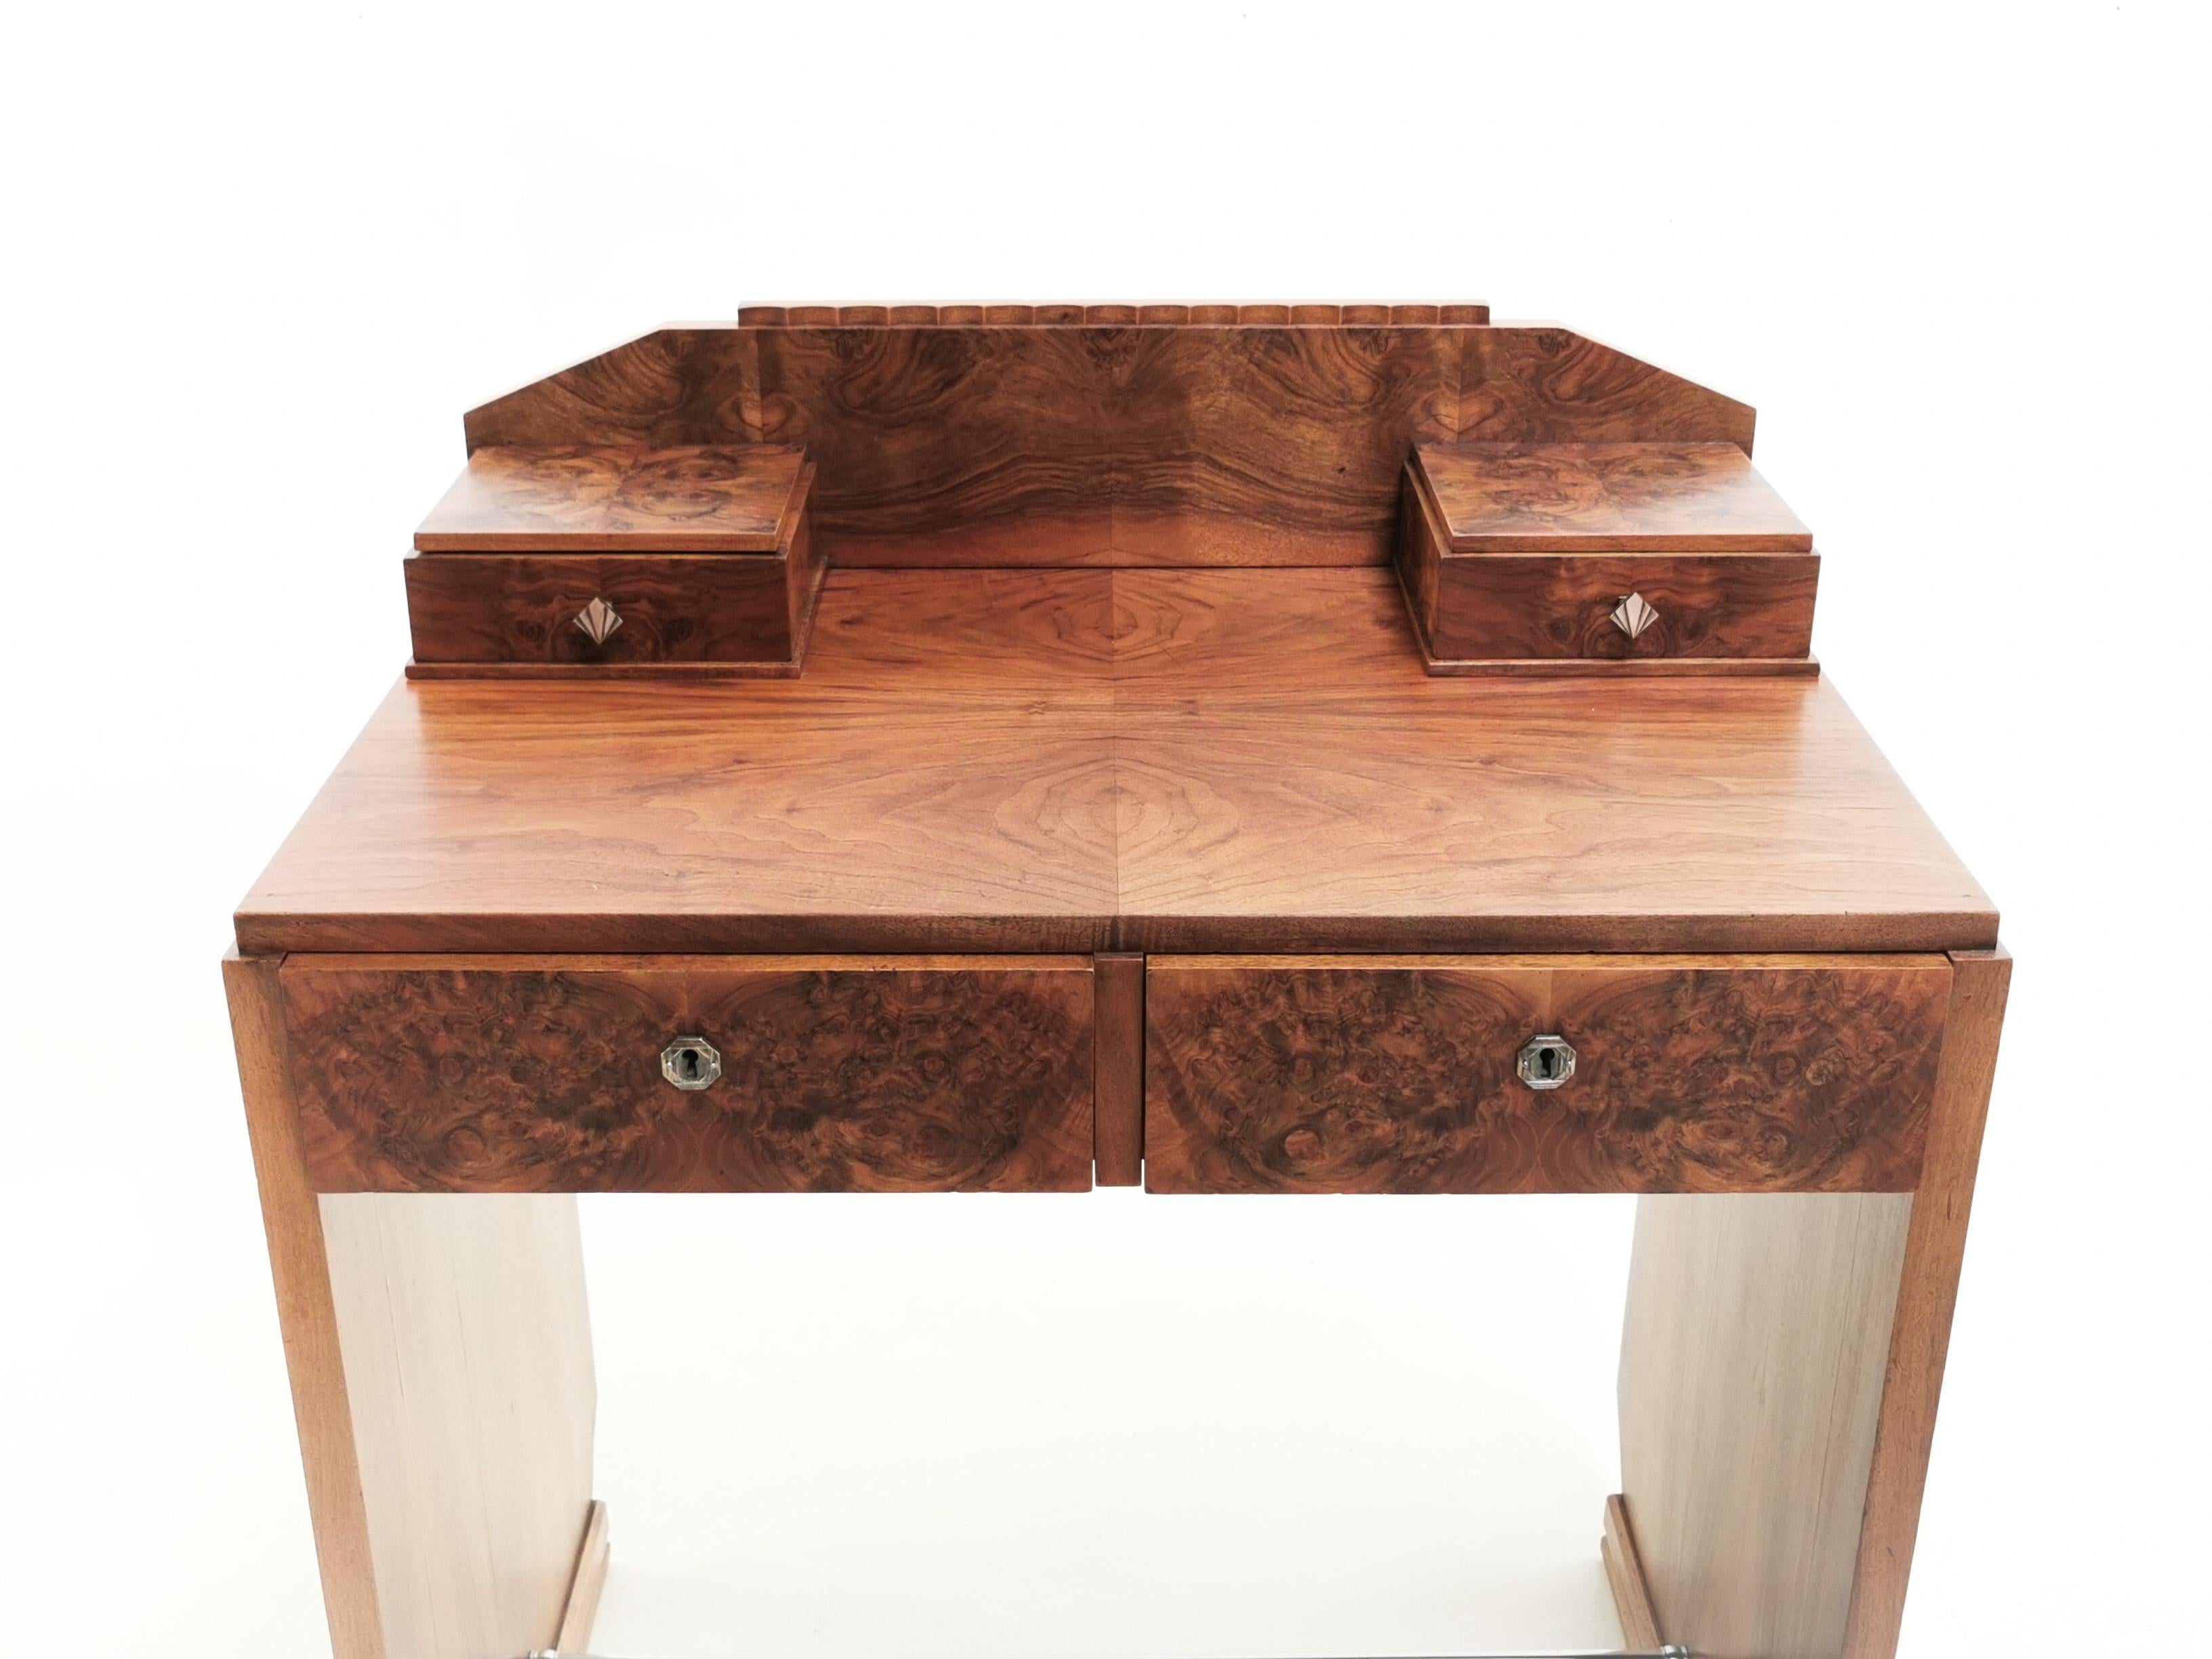 Art Deco walnut desk

An Art Deco wright desk that dates to the 1930s. Made from walnut and very compact.

A raised gallery back, two drawers and writing surface above two frieze drawers, raised on shaped sides united by a stretcher

Art Deco